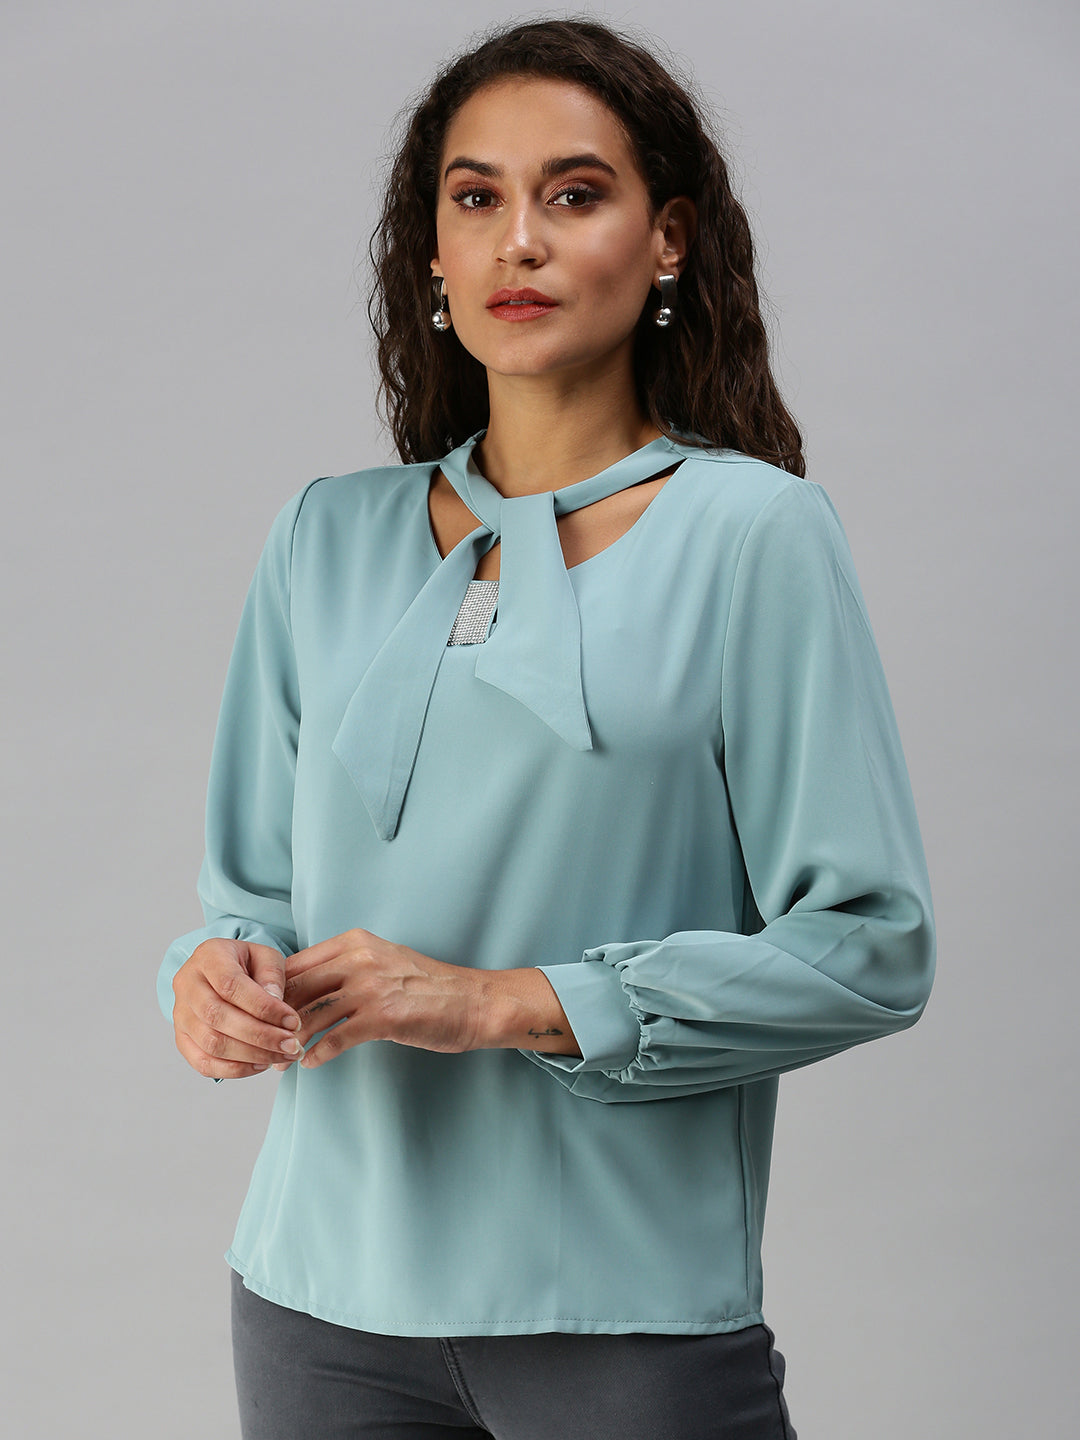 Women Tie-Up Neck Solid Turquoise Blue Top